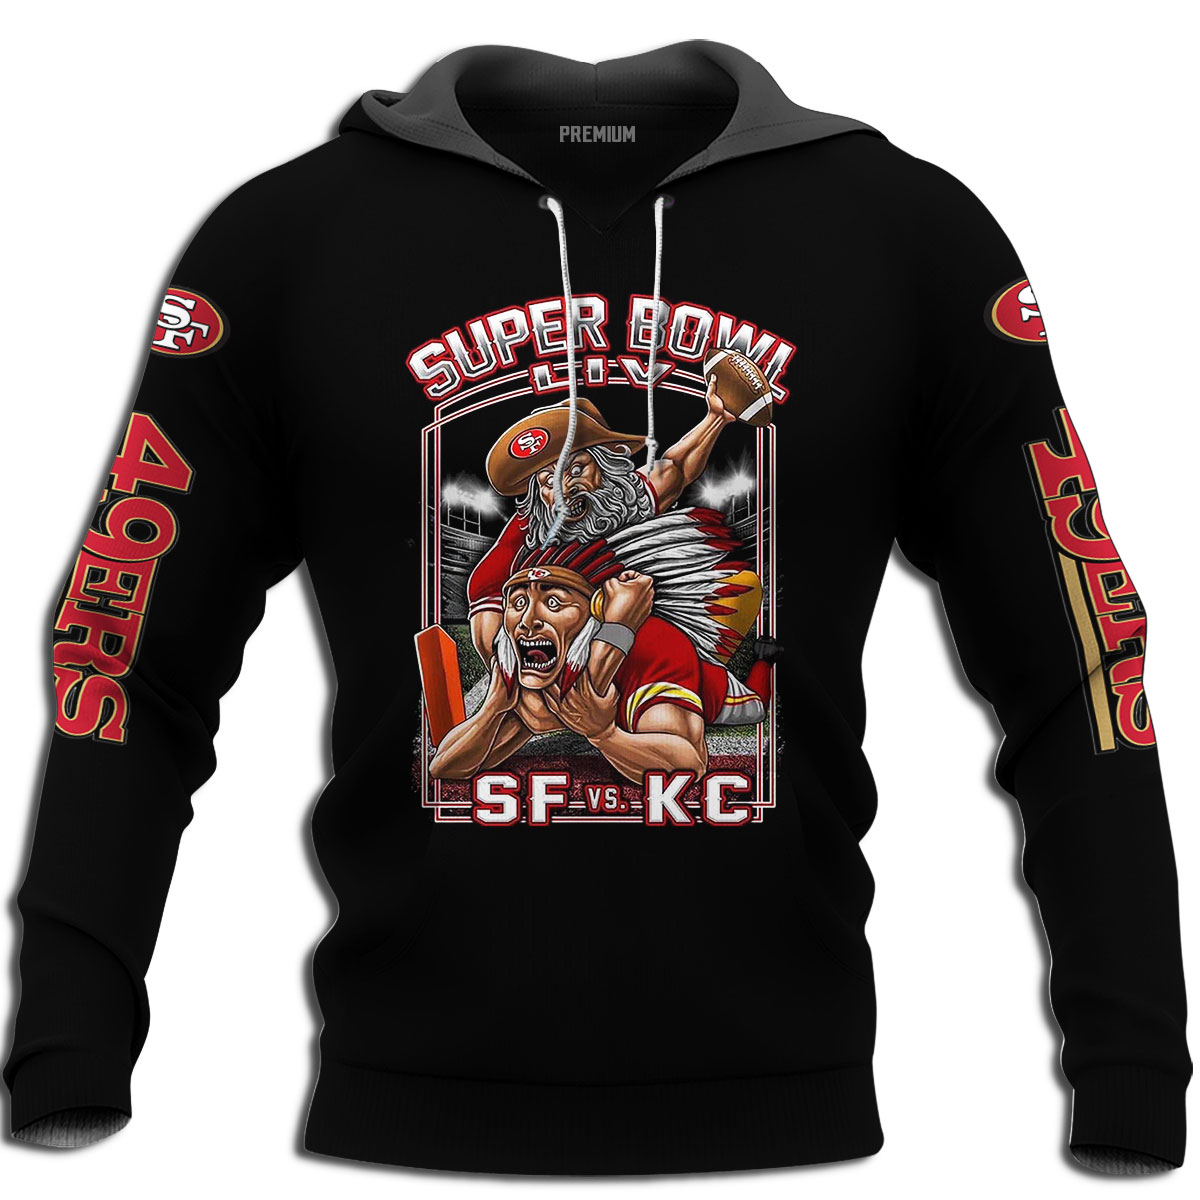 Super Bowl Liv Matchup Between The San Francisco 49ers And Kansas City Chiefs Full Size Up To 5xl